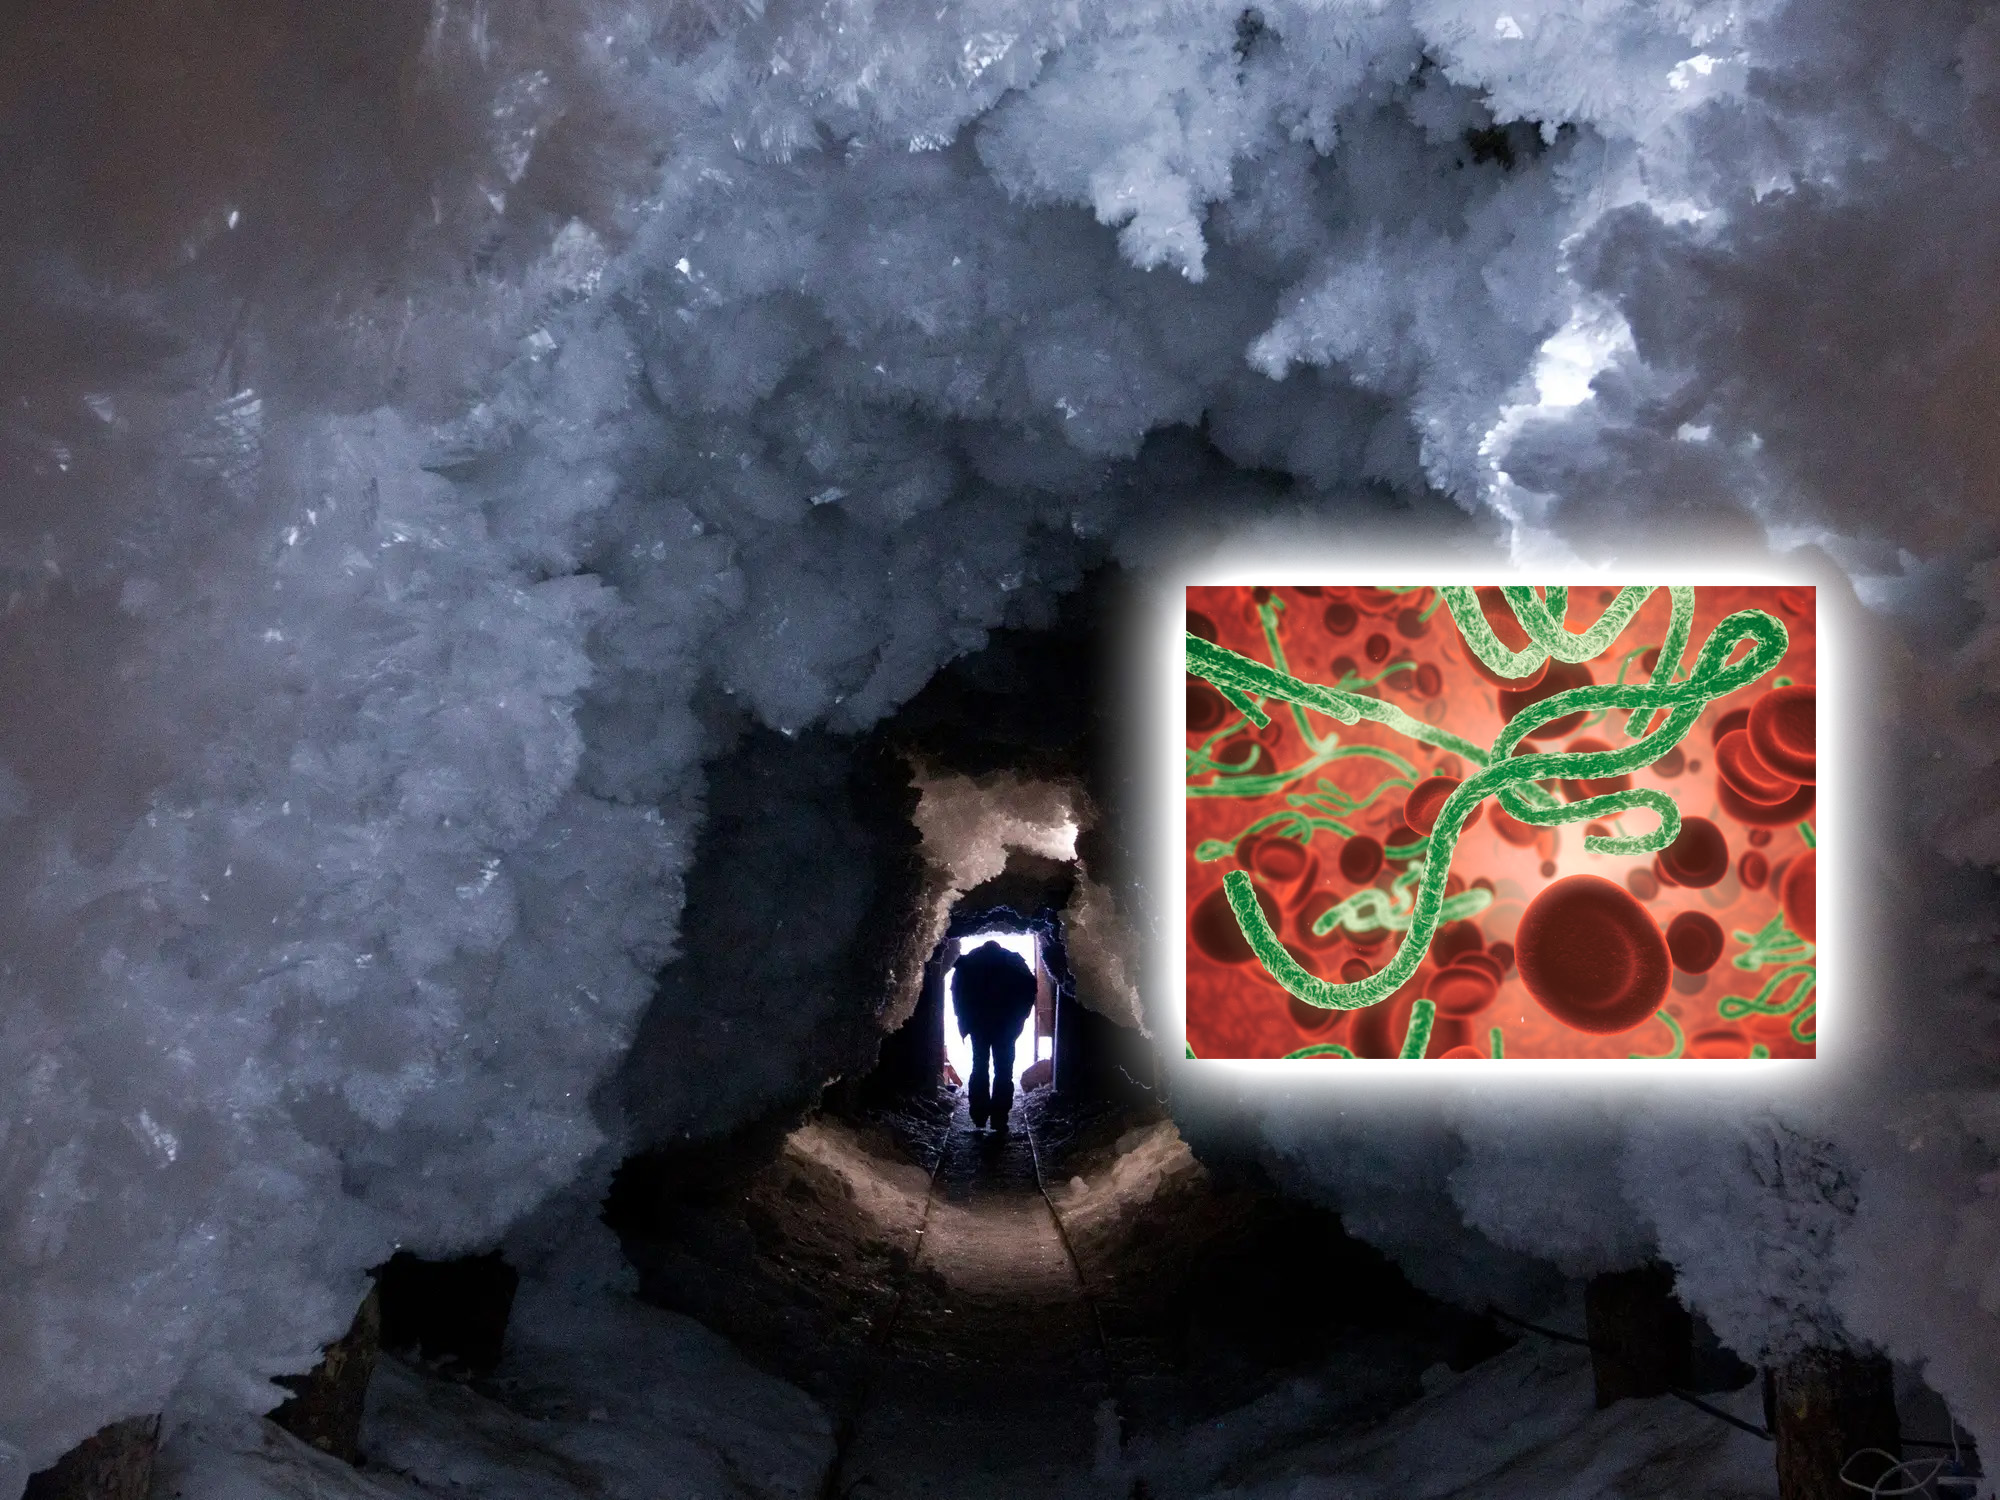 An photograph showing thawing permafrost and an illustration of a virus.